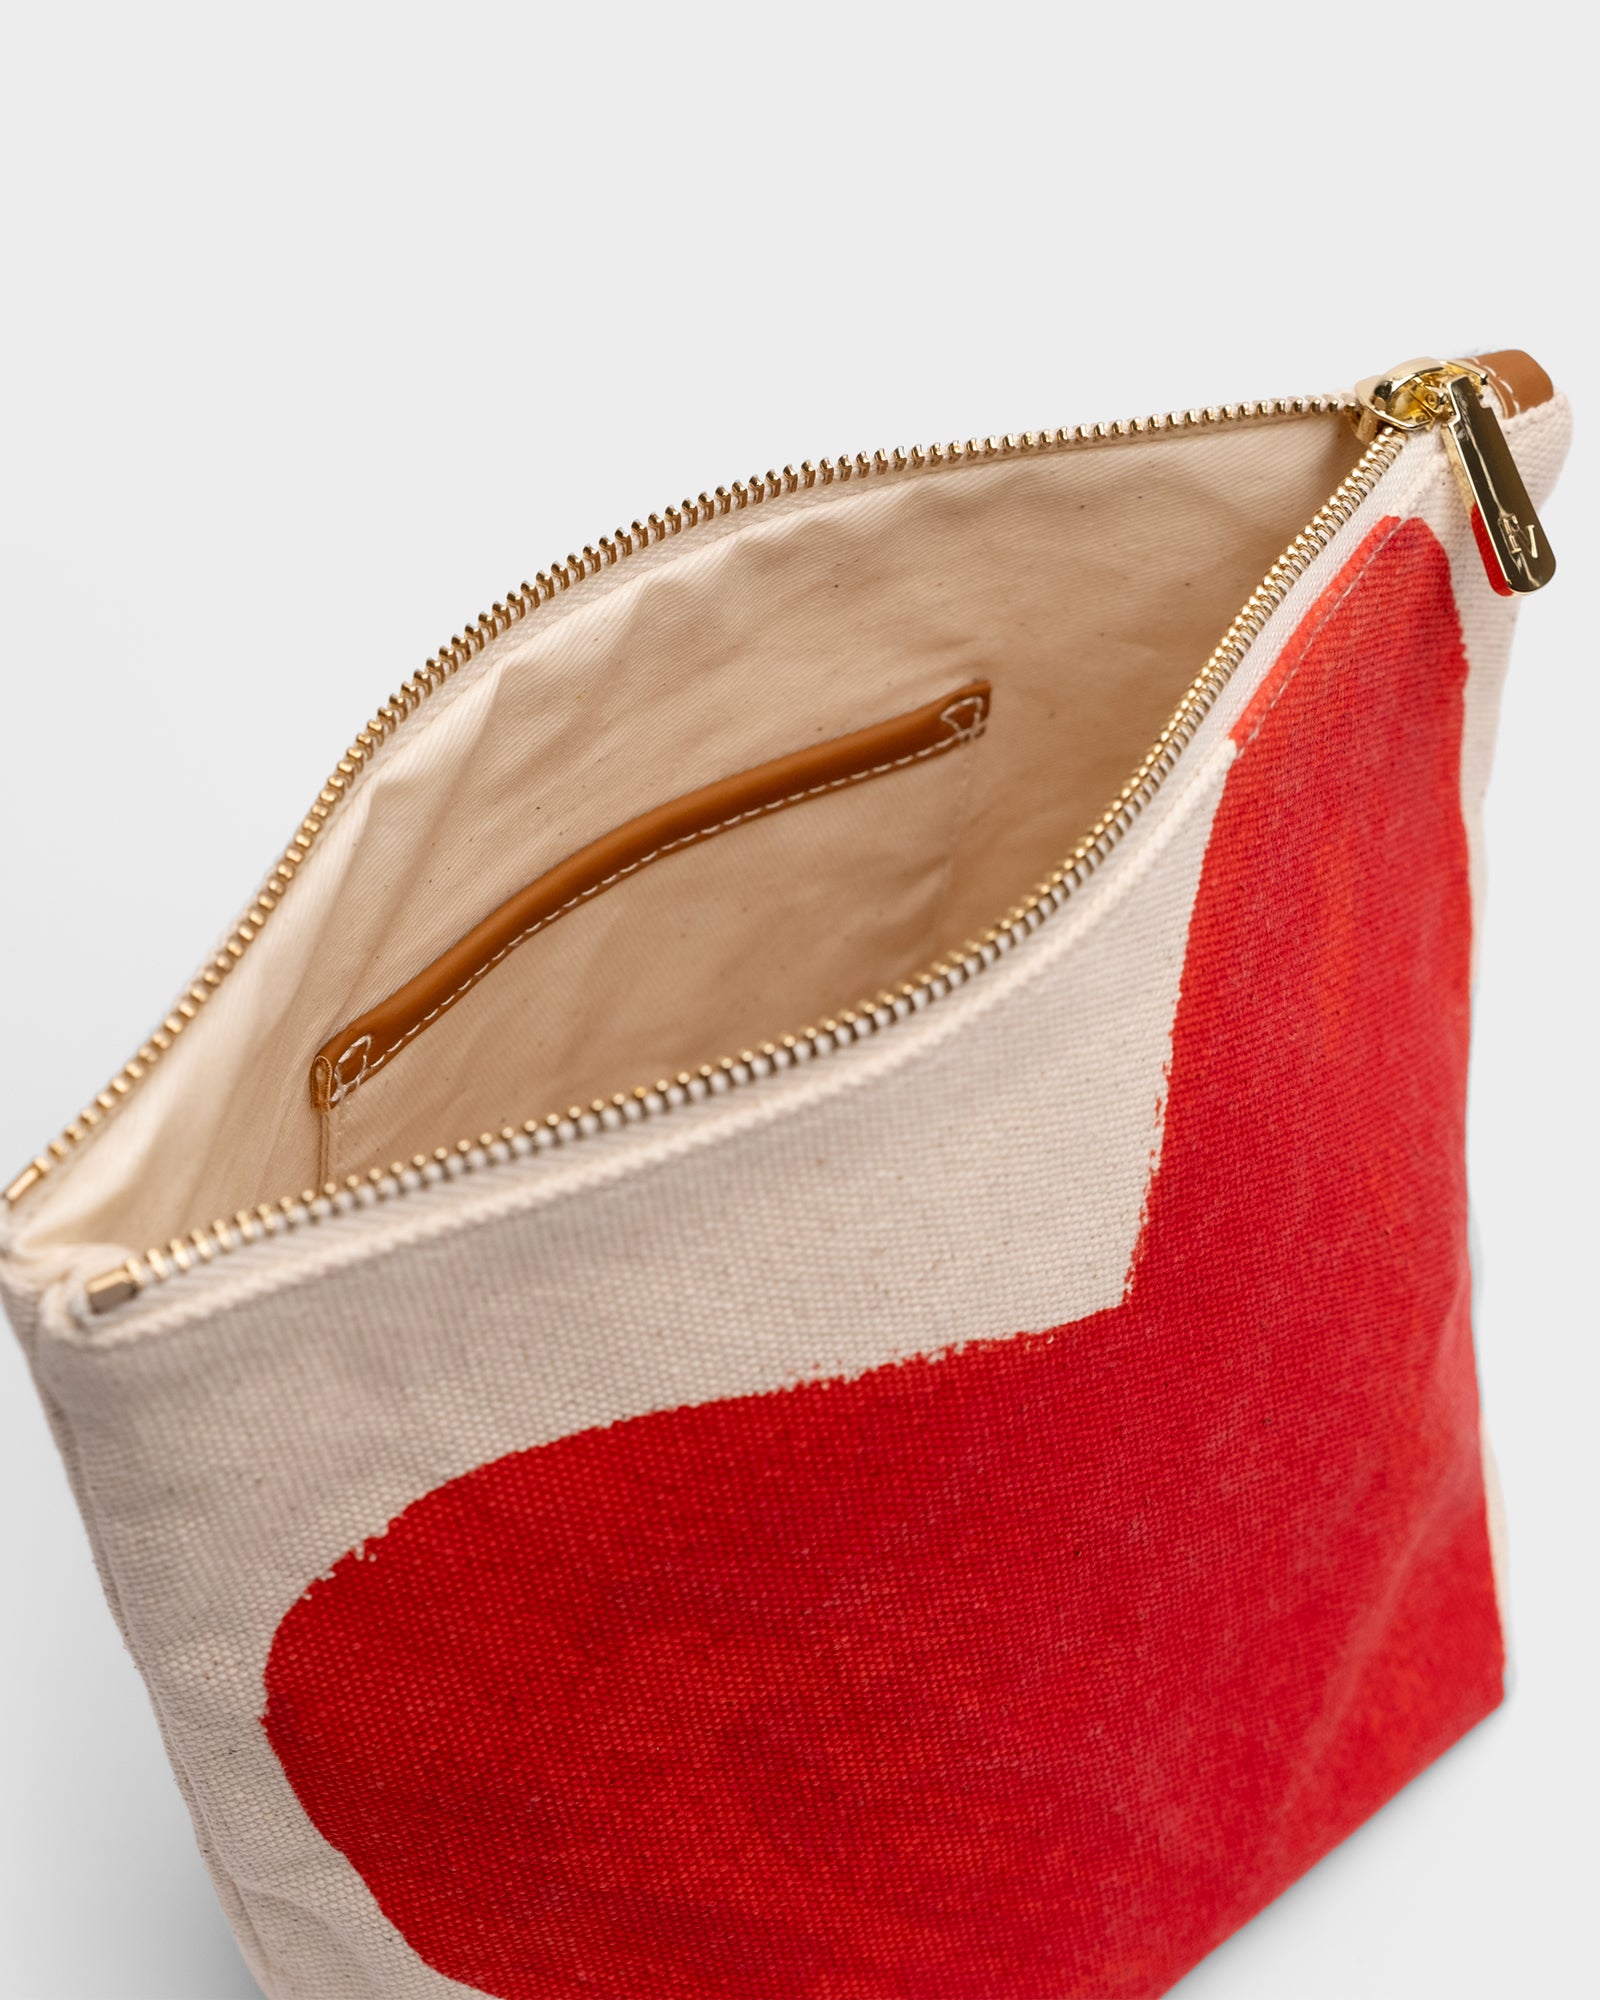 Tall Heart Cosmetic Bag Natural Red